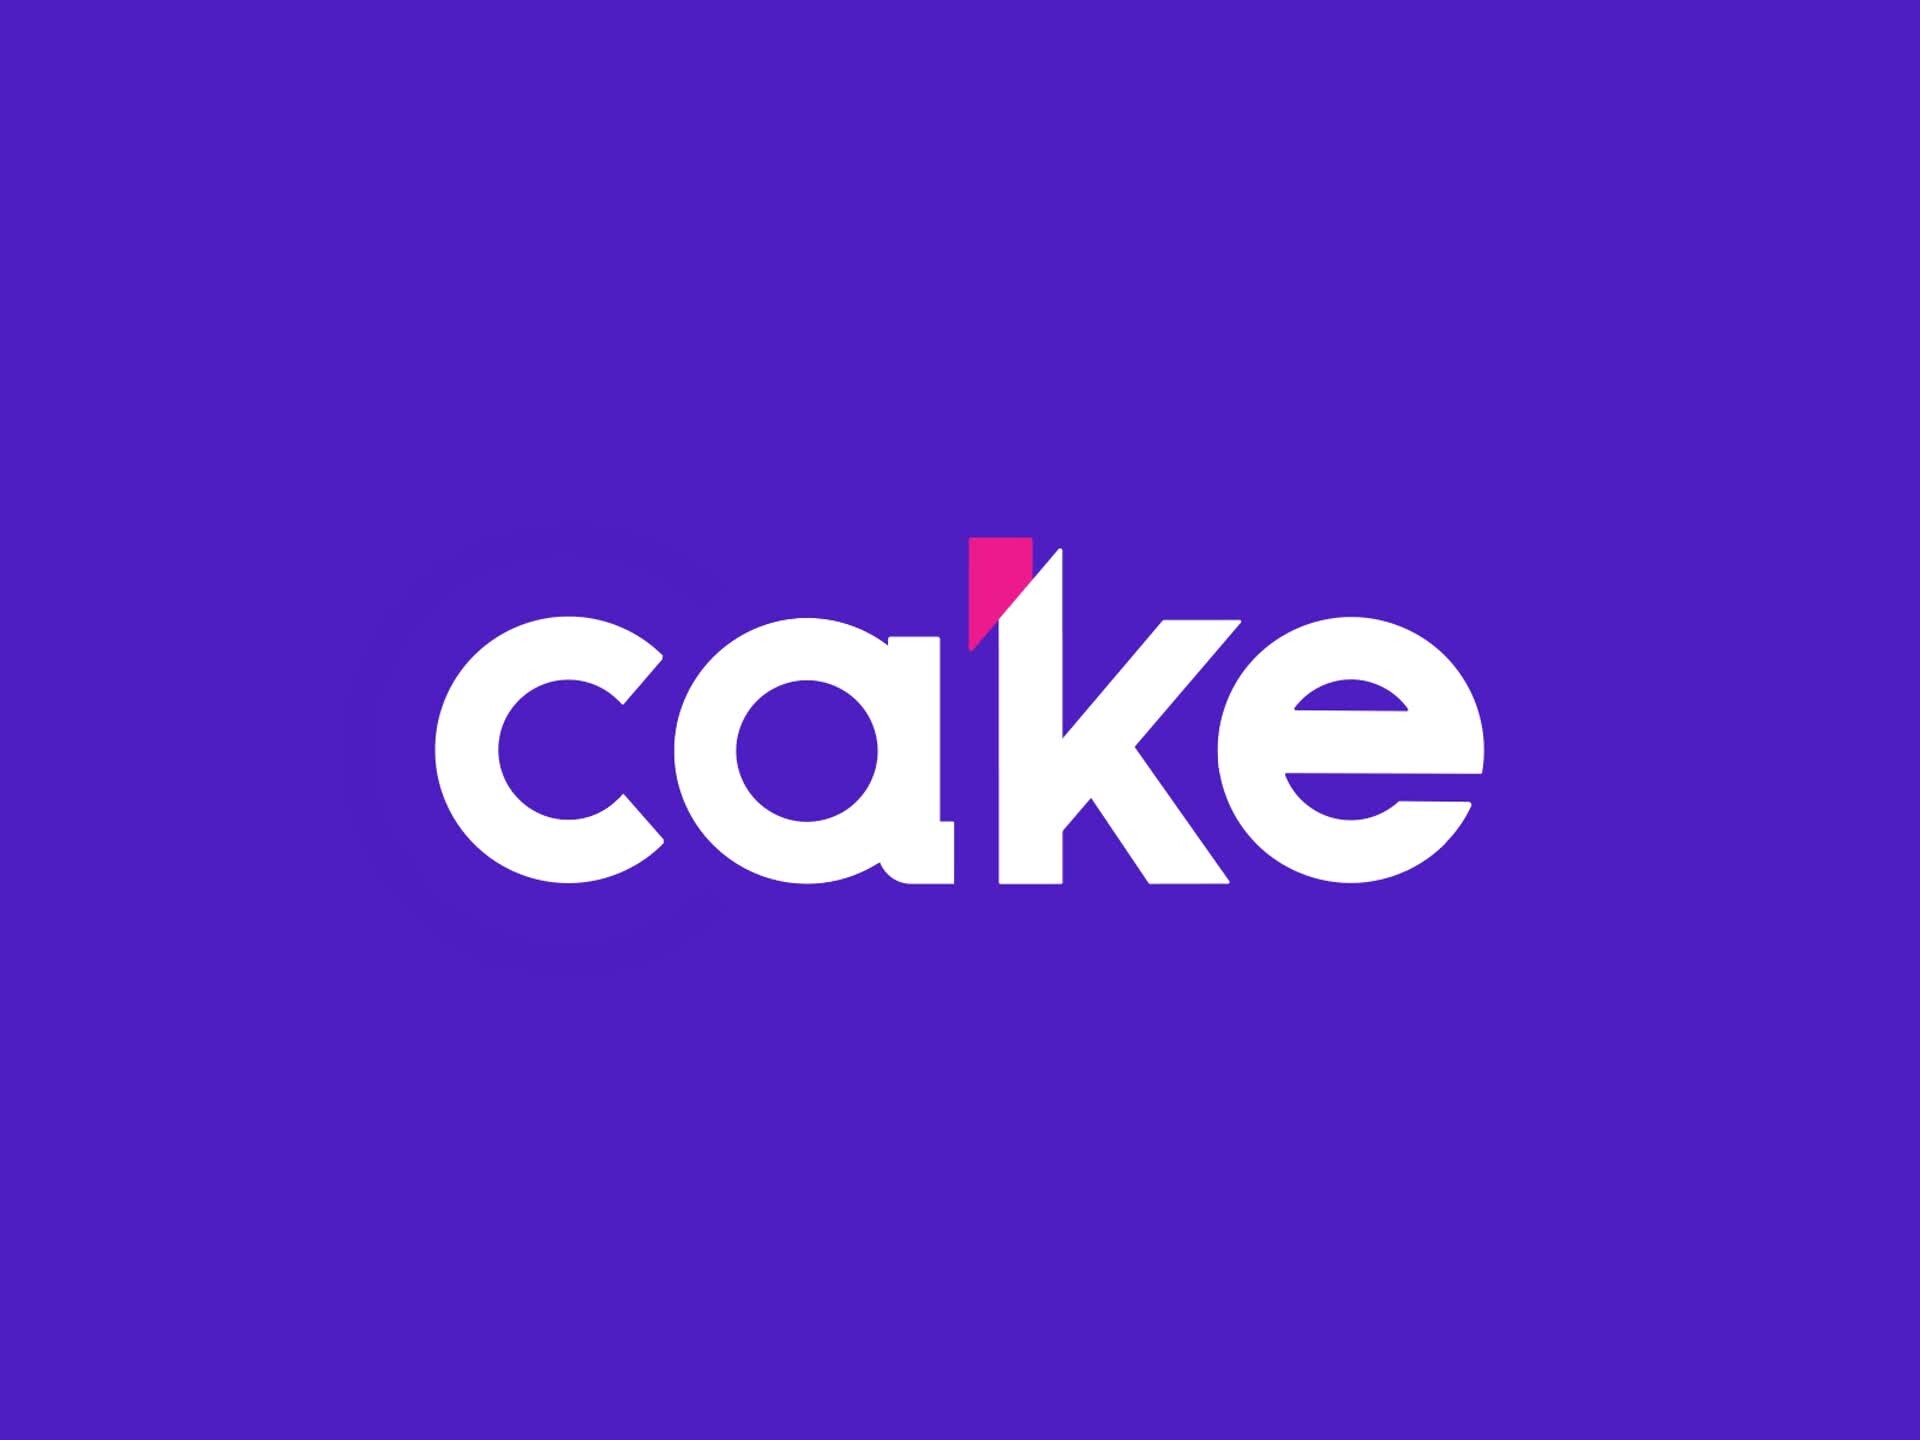 How to use cake app full information about in hindi - YouTube